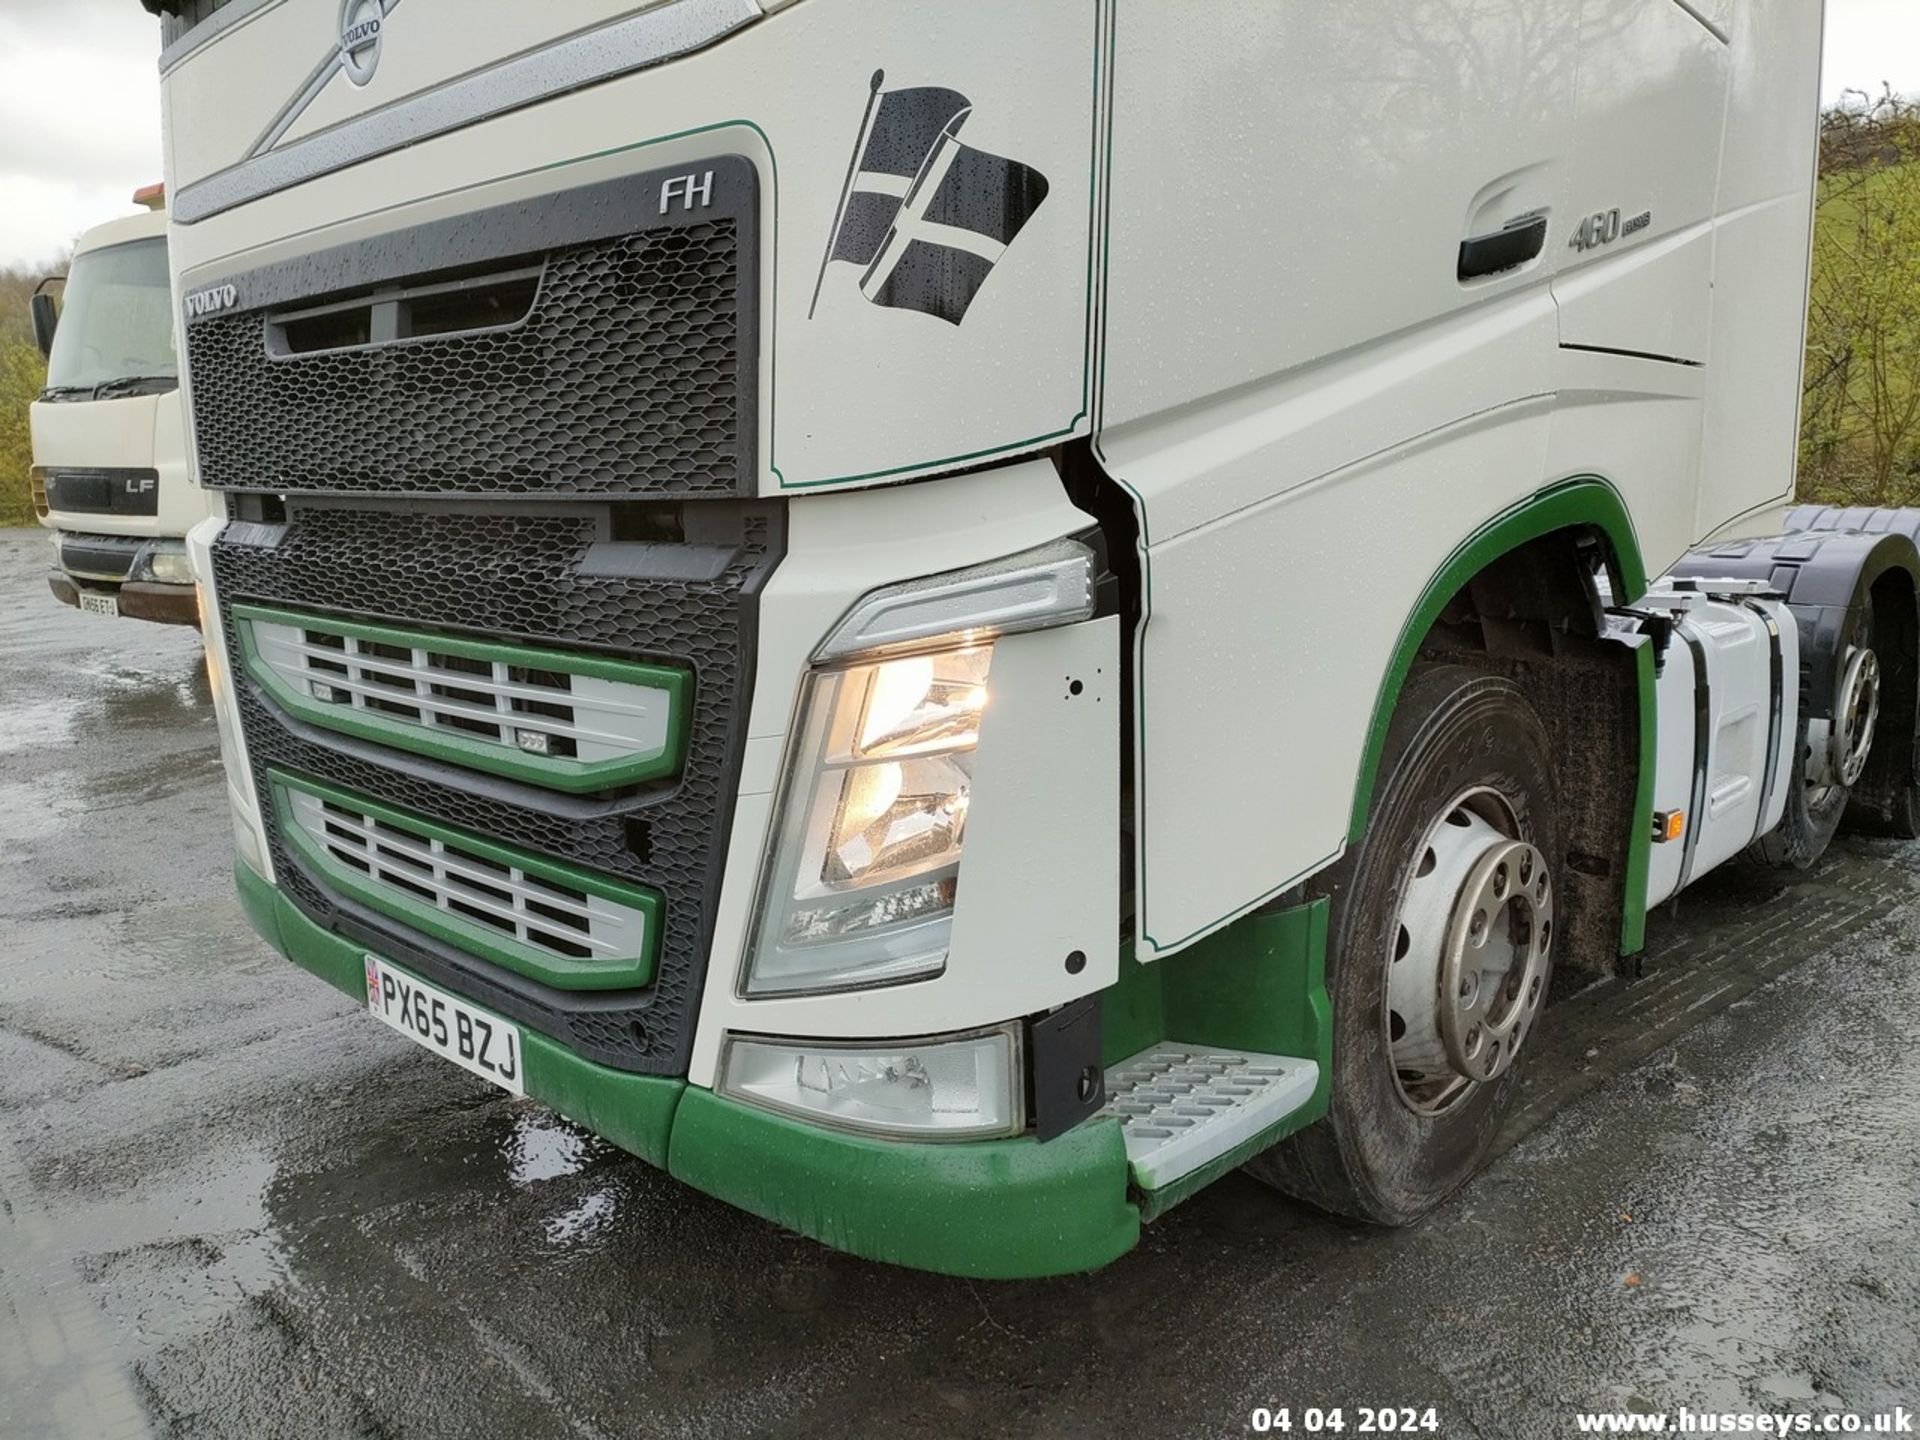 15/65 VOLVO FH - 12777cc 2dr Tractor Unit (White) - Image 11 of 34